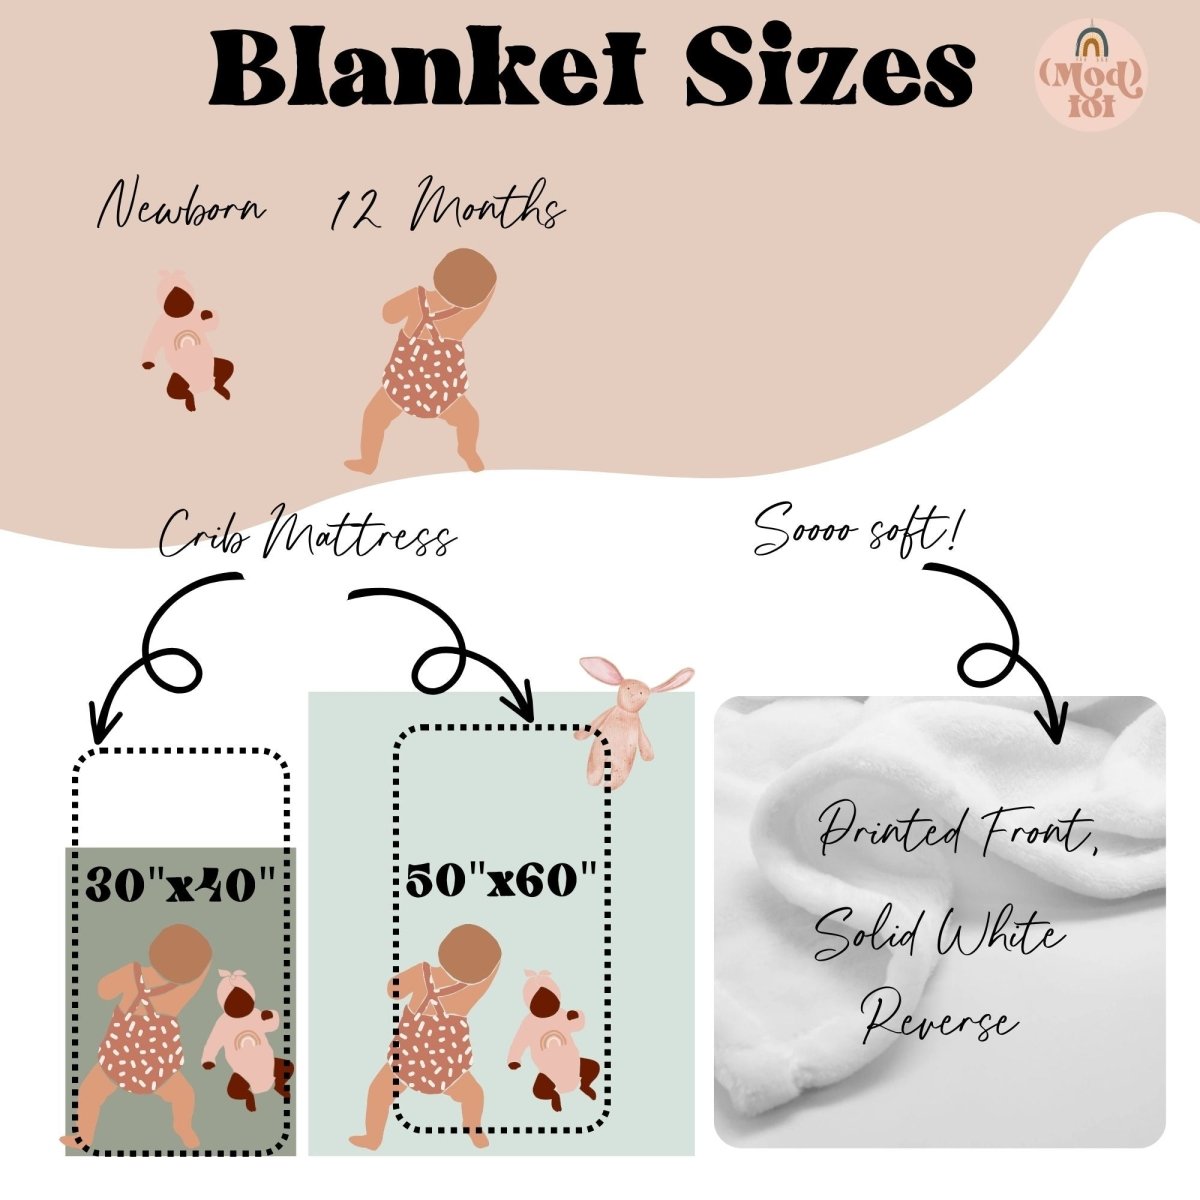 Tropical Paradise Flamingo Minky Blanket - gender_girl, Personalized_No, Theme_Floral